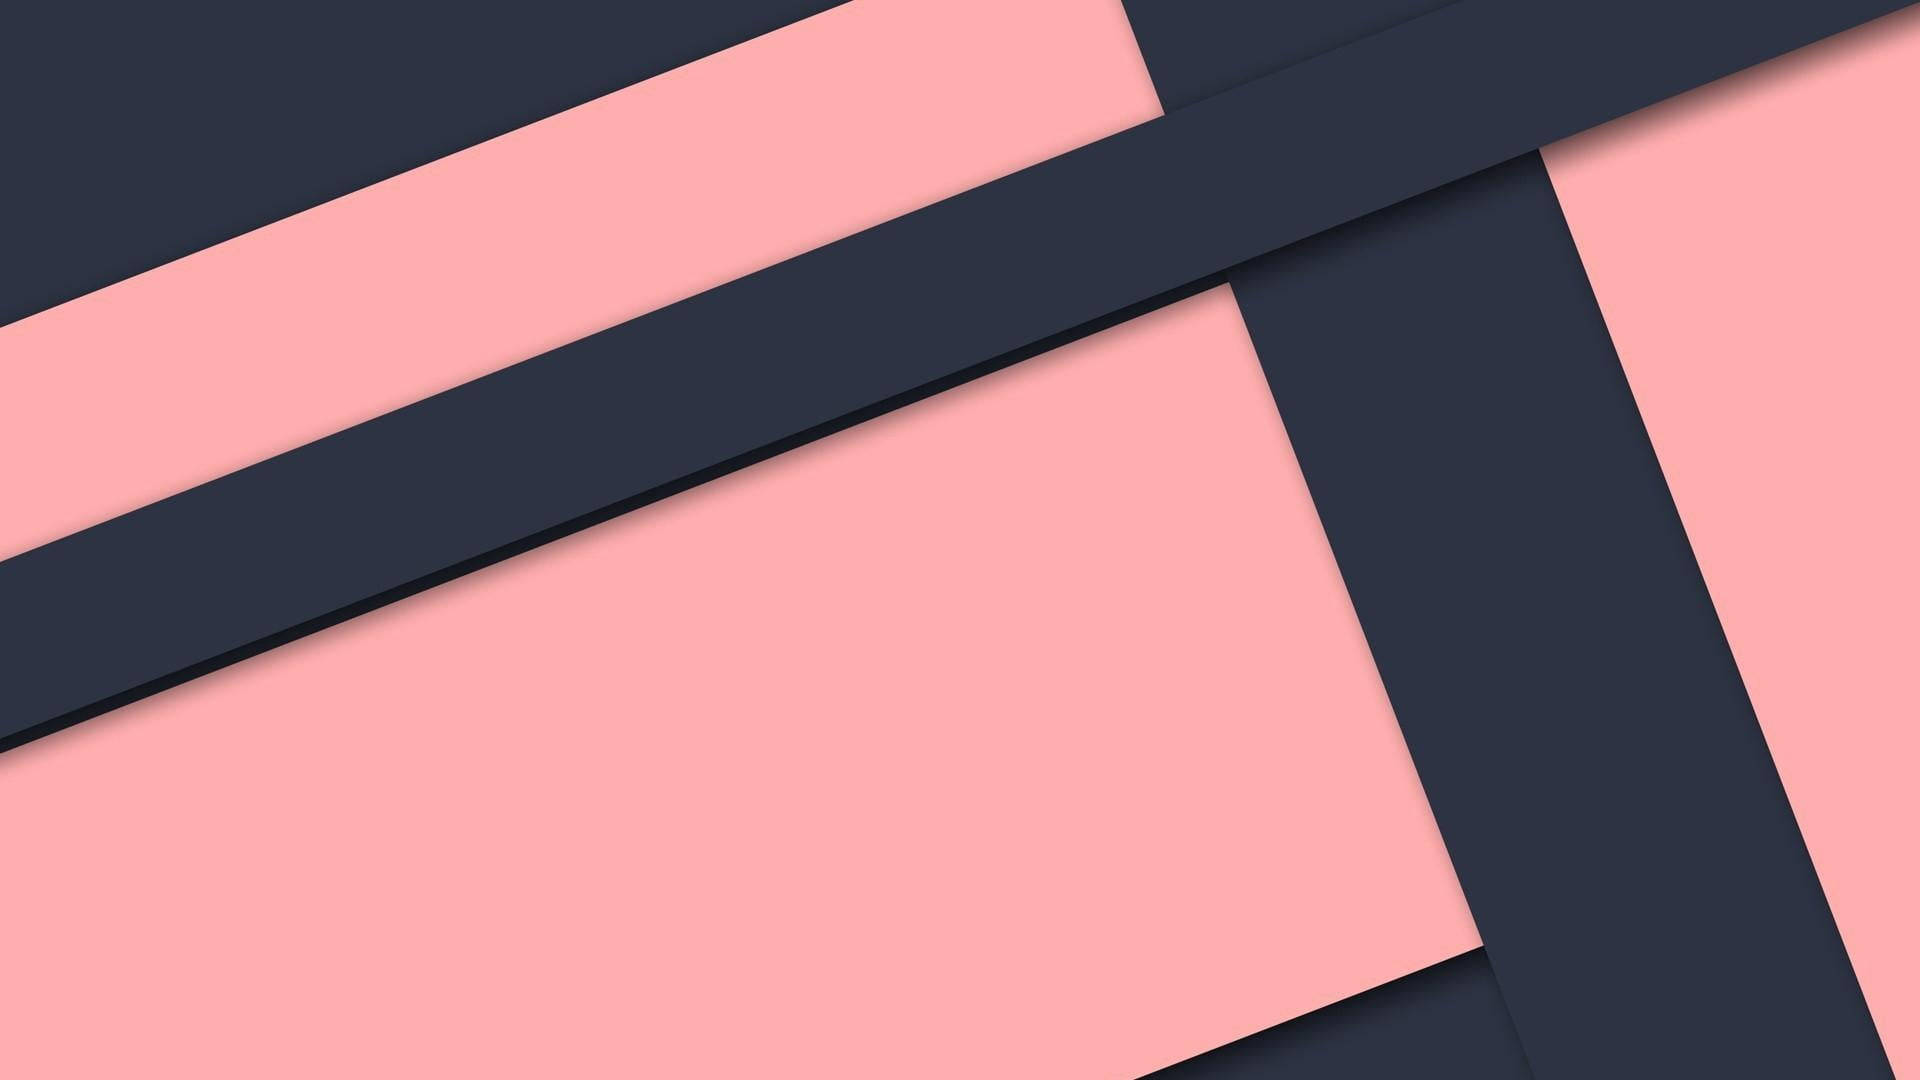 Black And Pink Aesthetic Material Design Picture